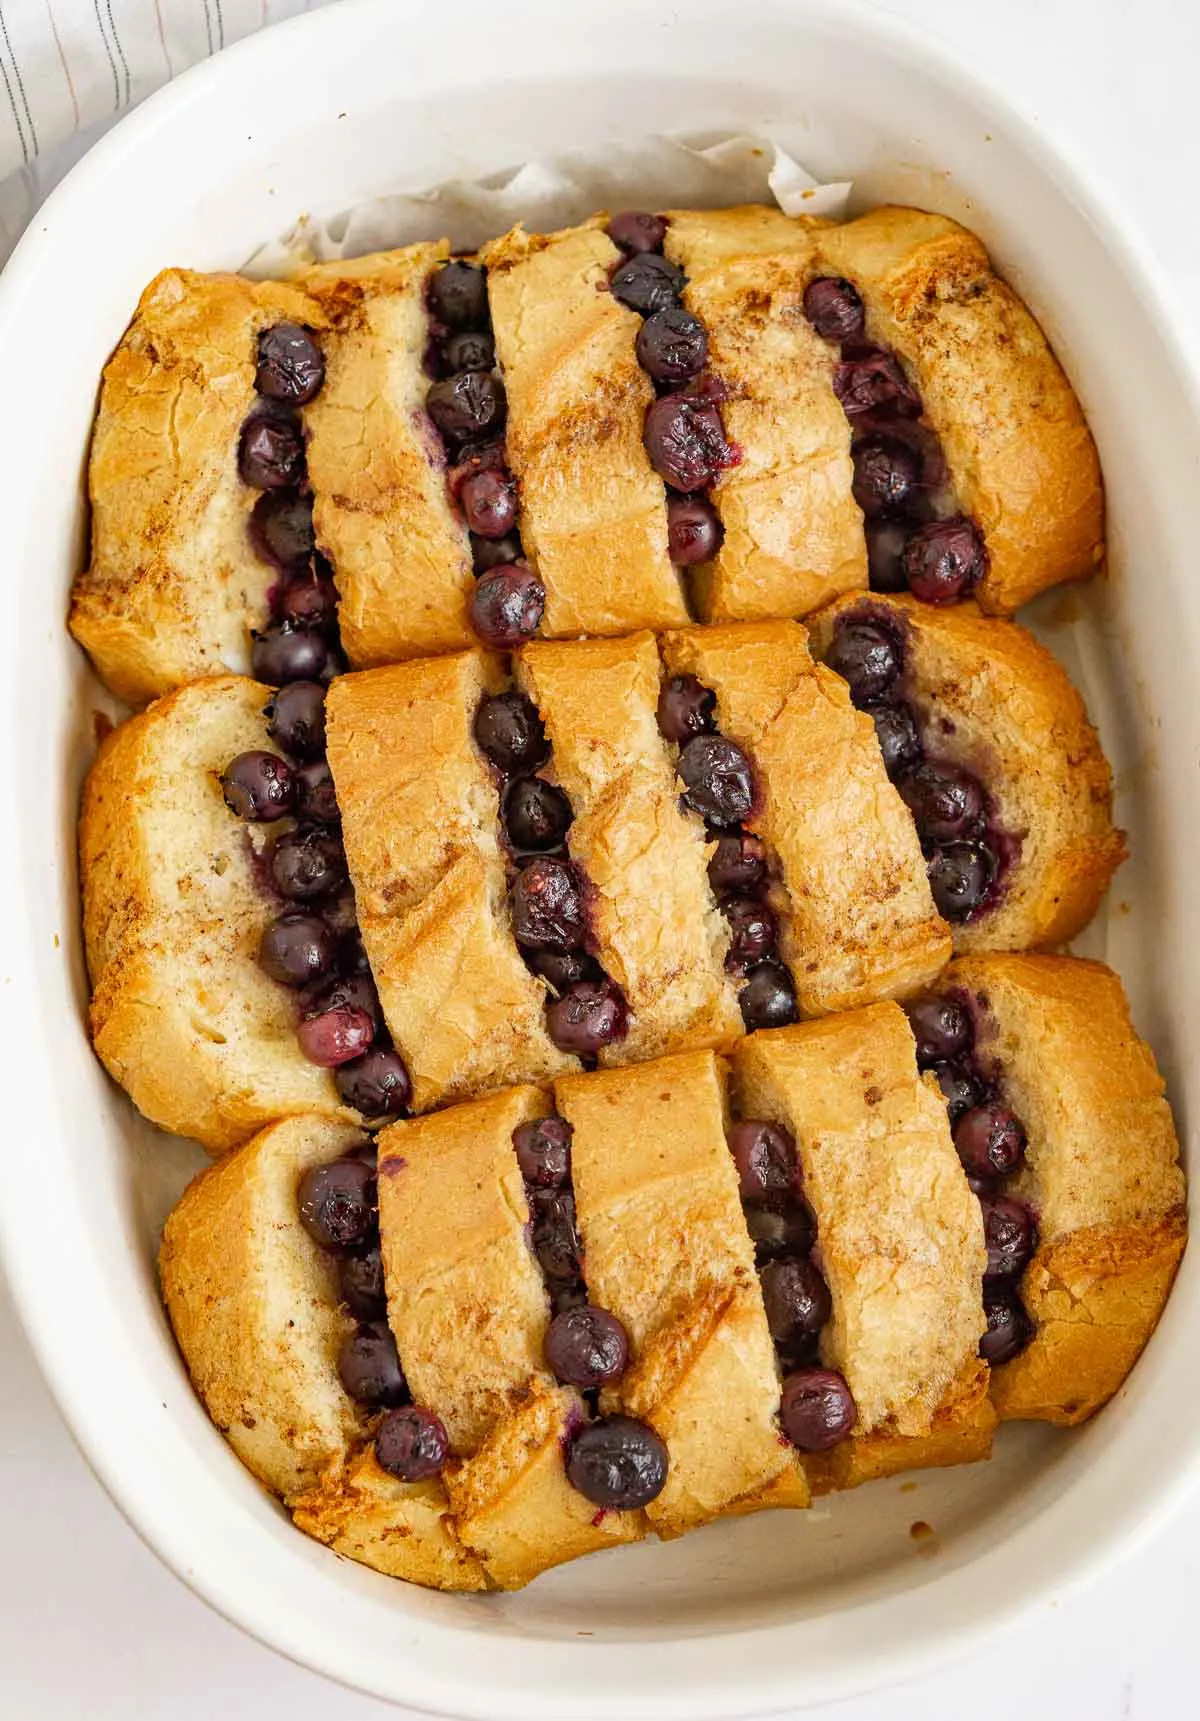 Baked Hasselback baguette French toast